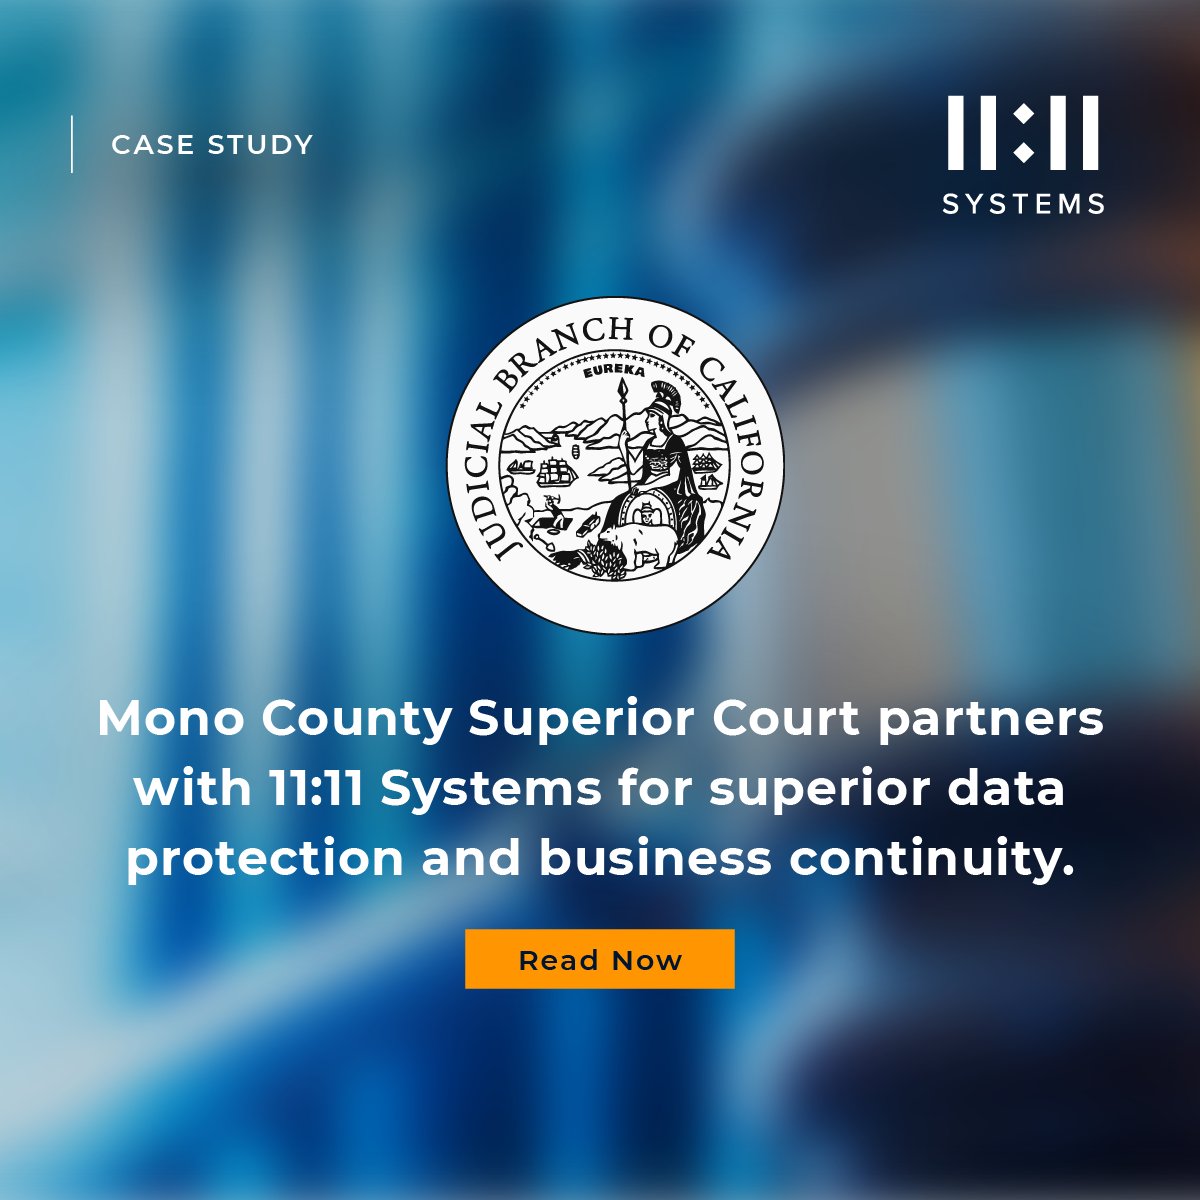 For most organizations, unplanned downtime can result in irrecoverable, long-term damage. That is why Mono County Superior Court worked with 11:11 Systems to guard against more than just the threat of natural disasters and bandwidth issues. 1111systems.com/wp-content/upl…